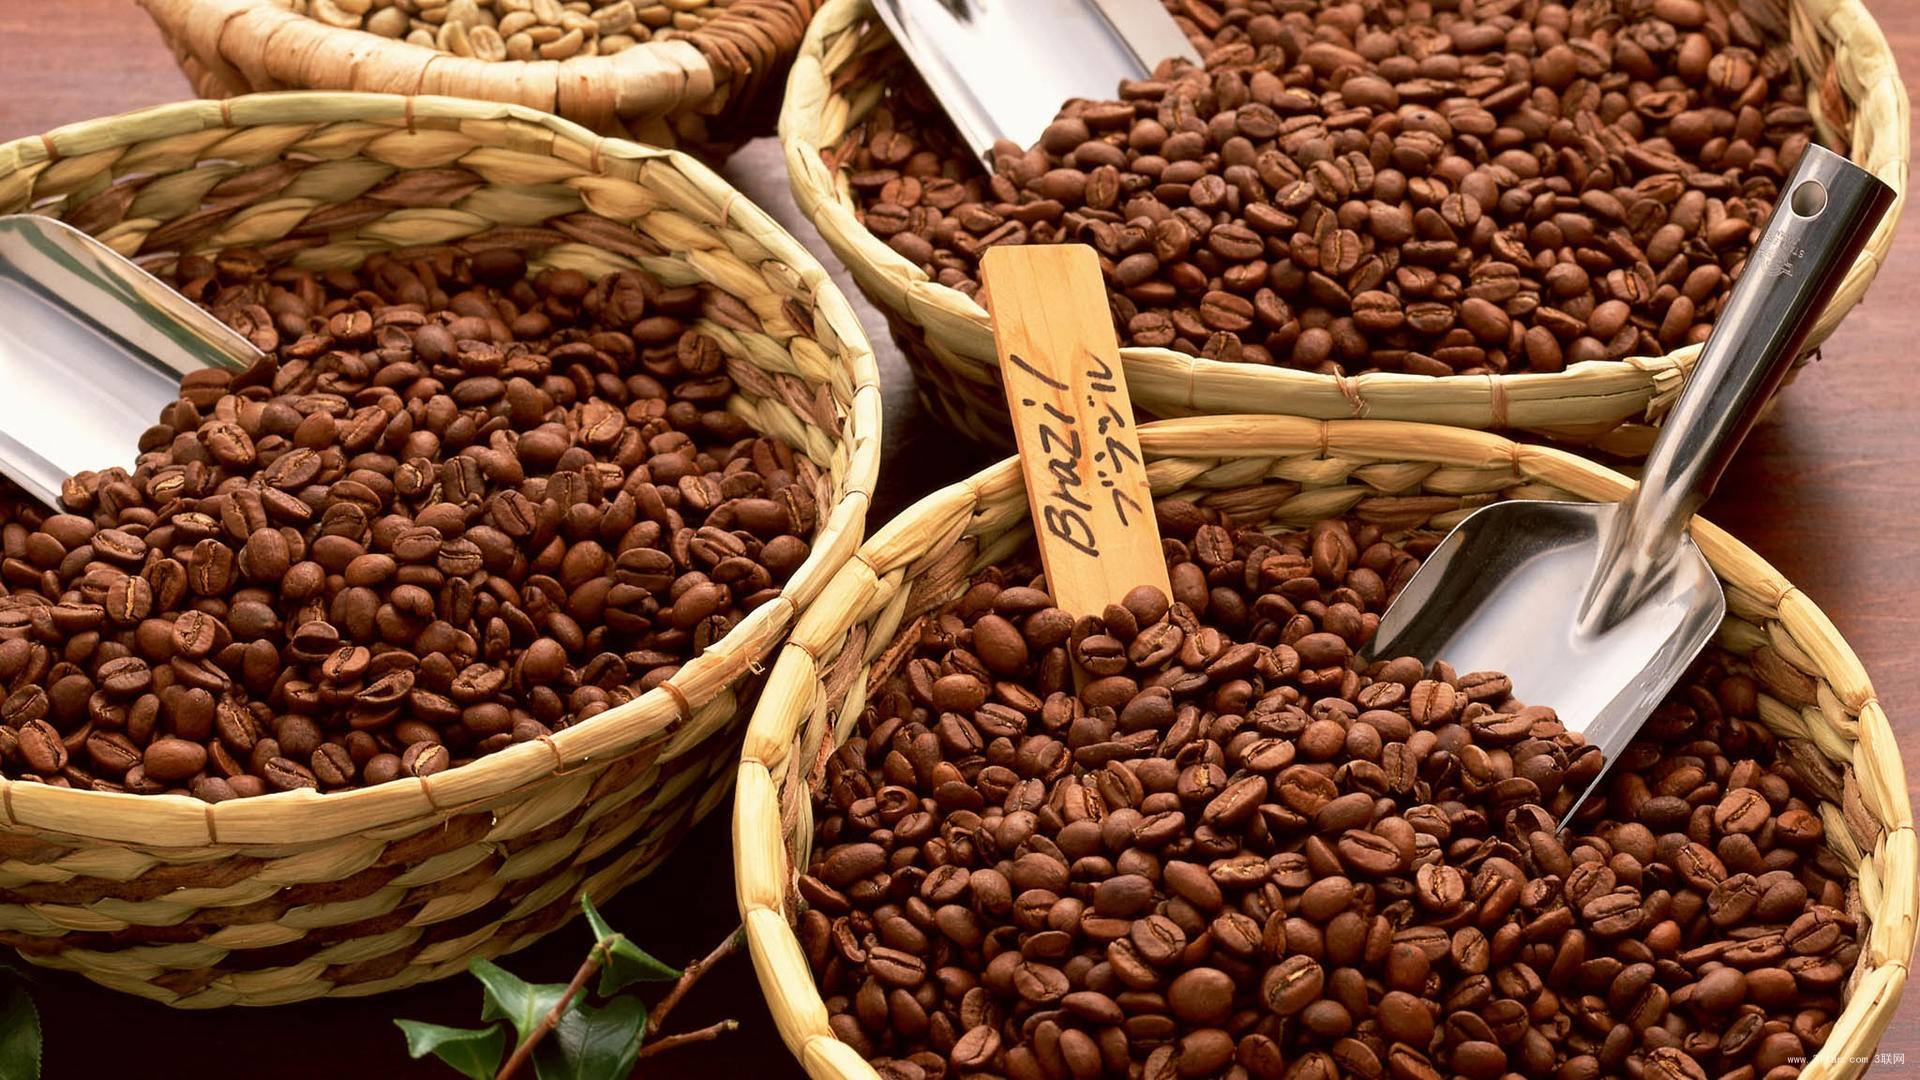 The flavor of Colombian coffee beans, the efficacy of Colombian coffee beans